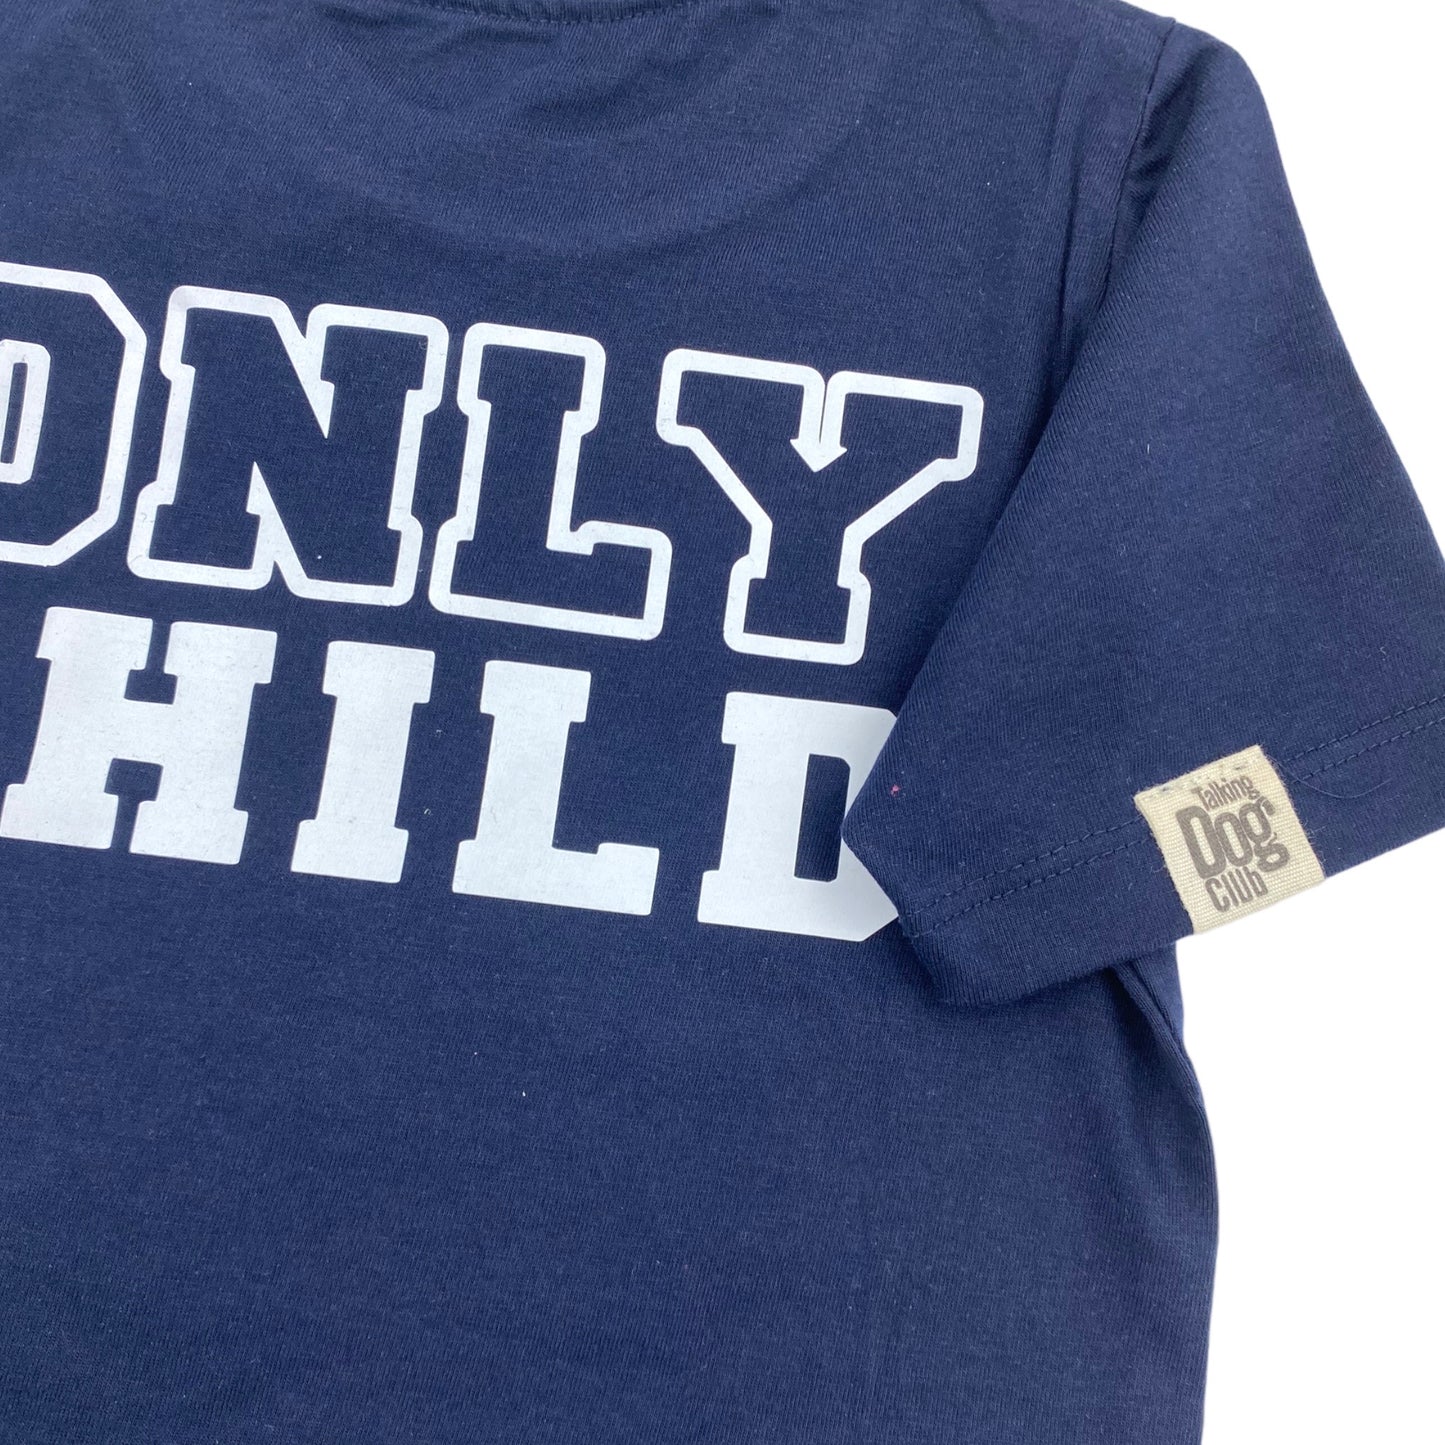 Only Child Dog Tee